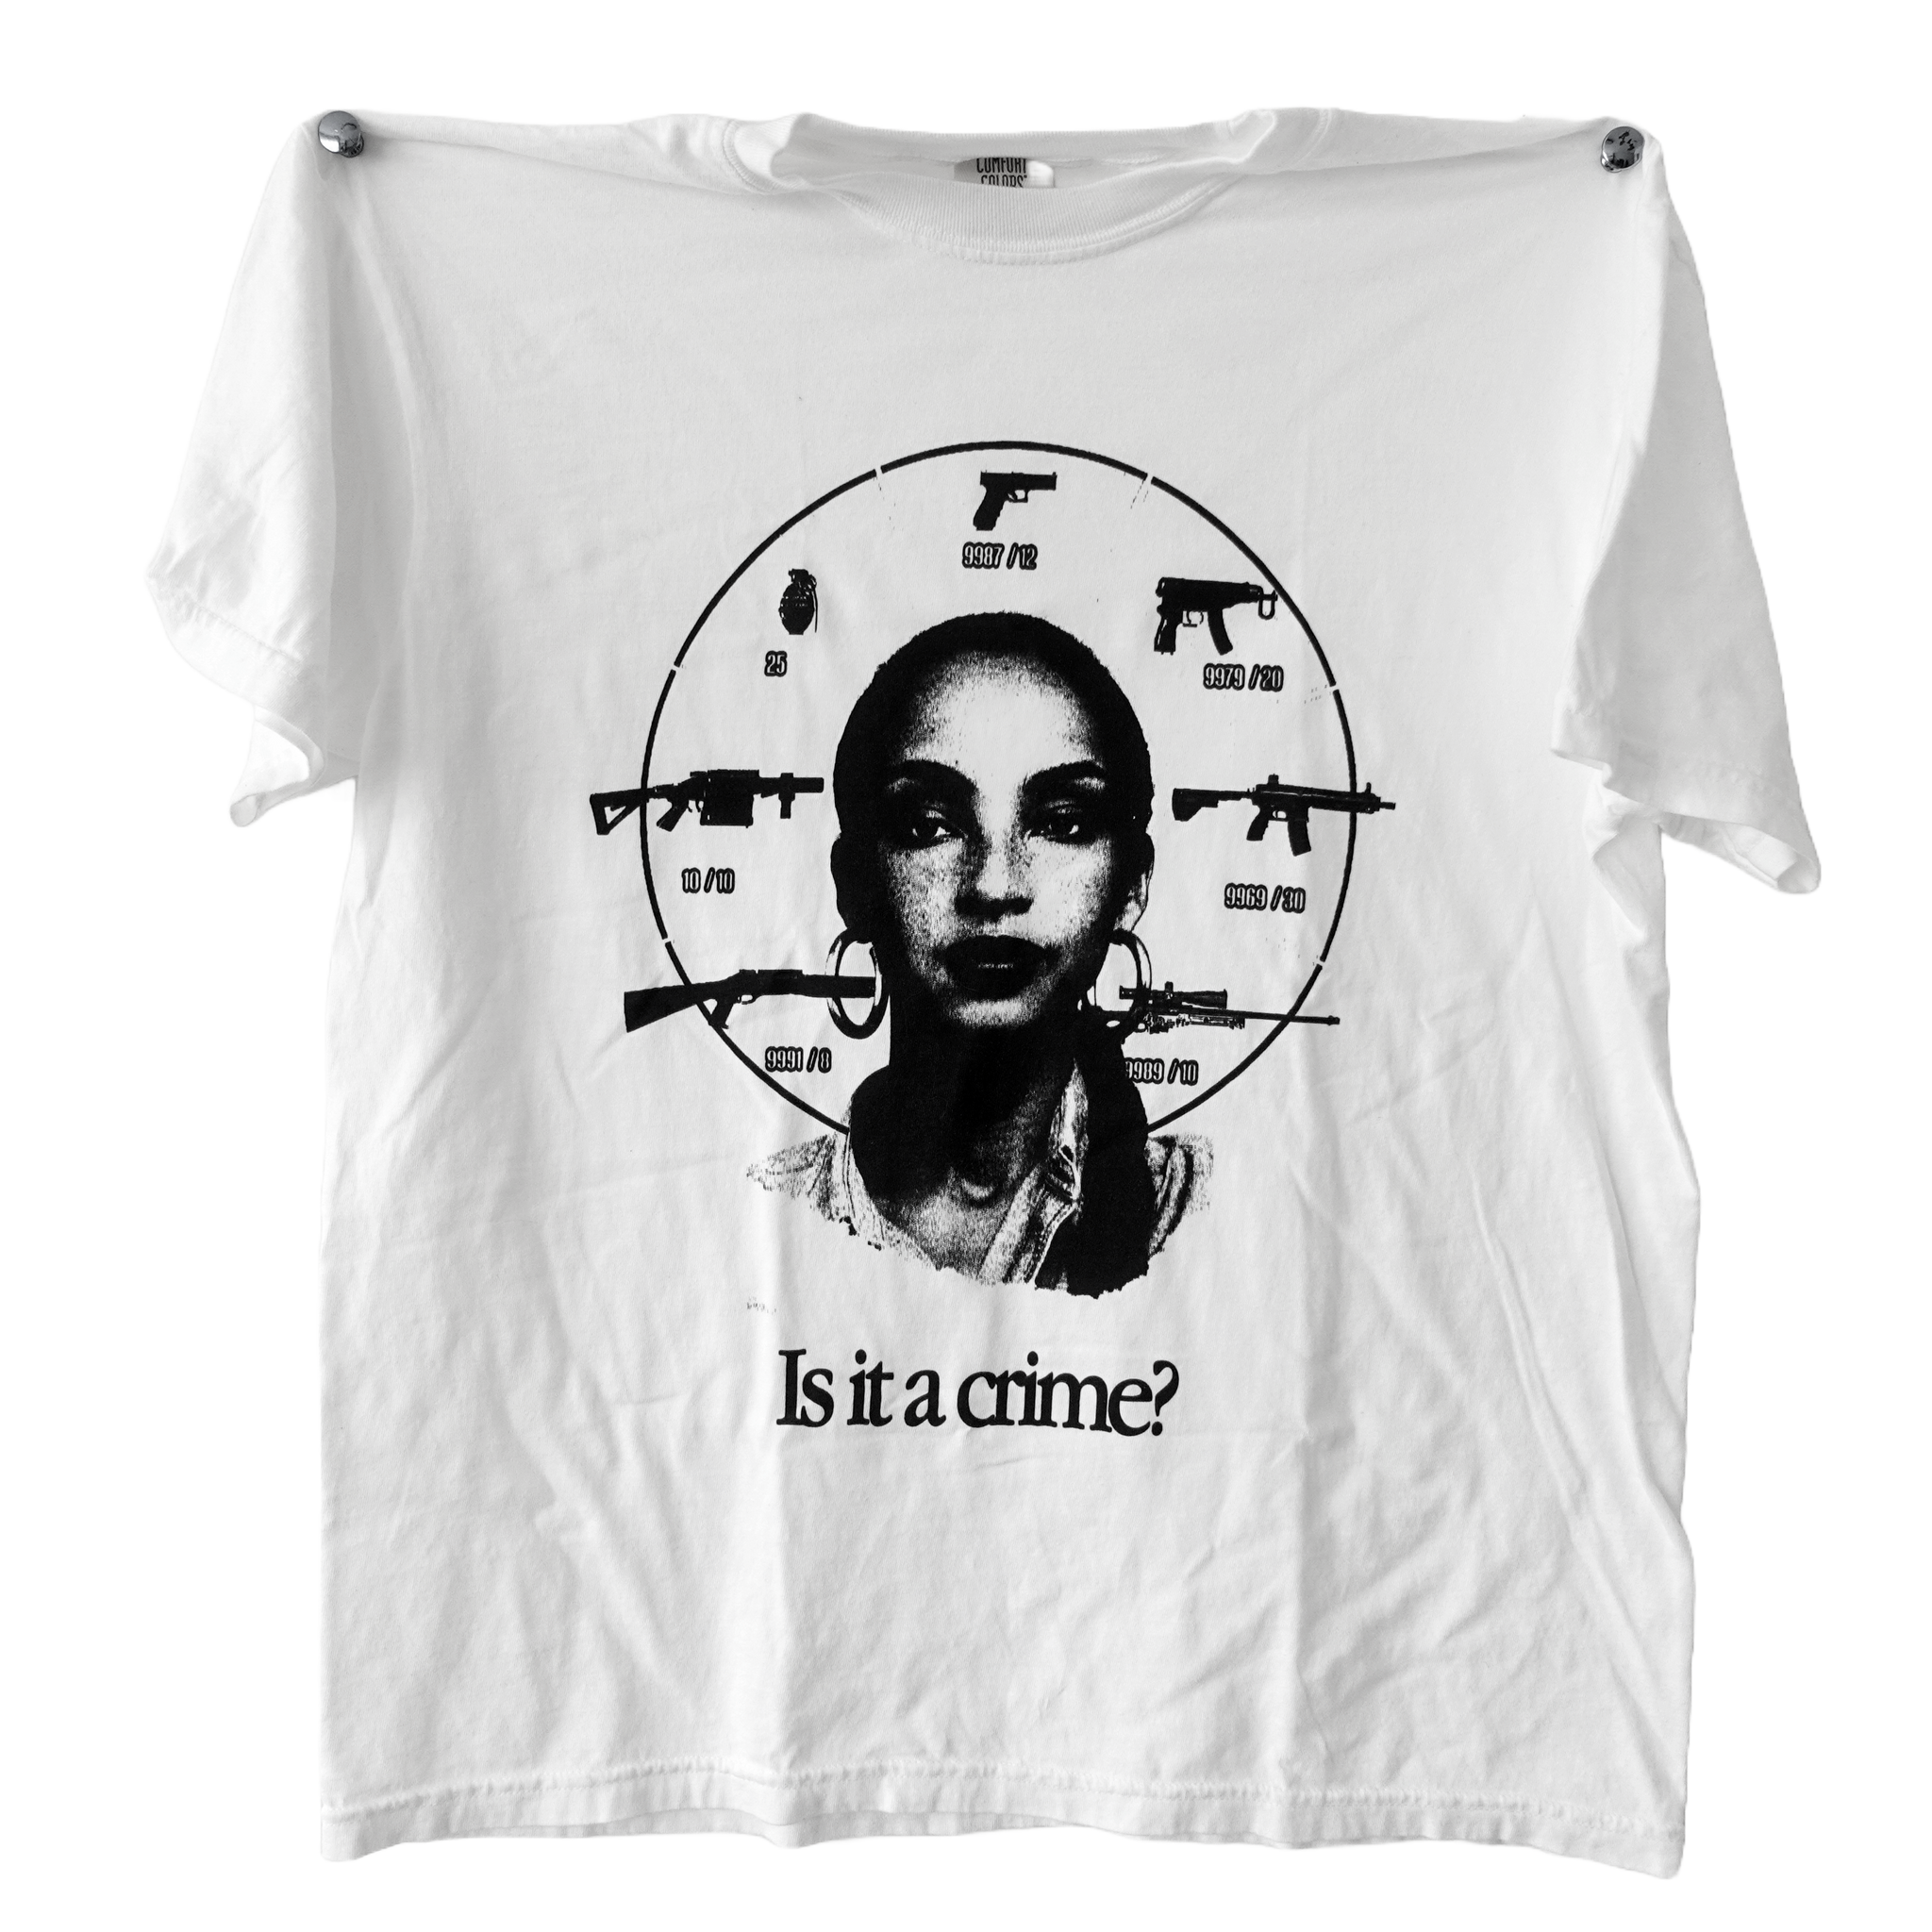 #088 Sade "is it a crime" Tee